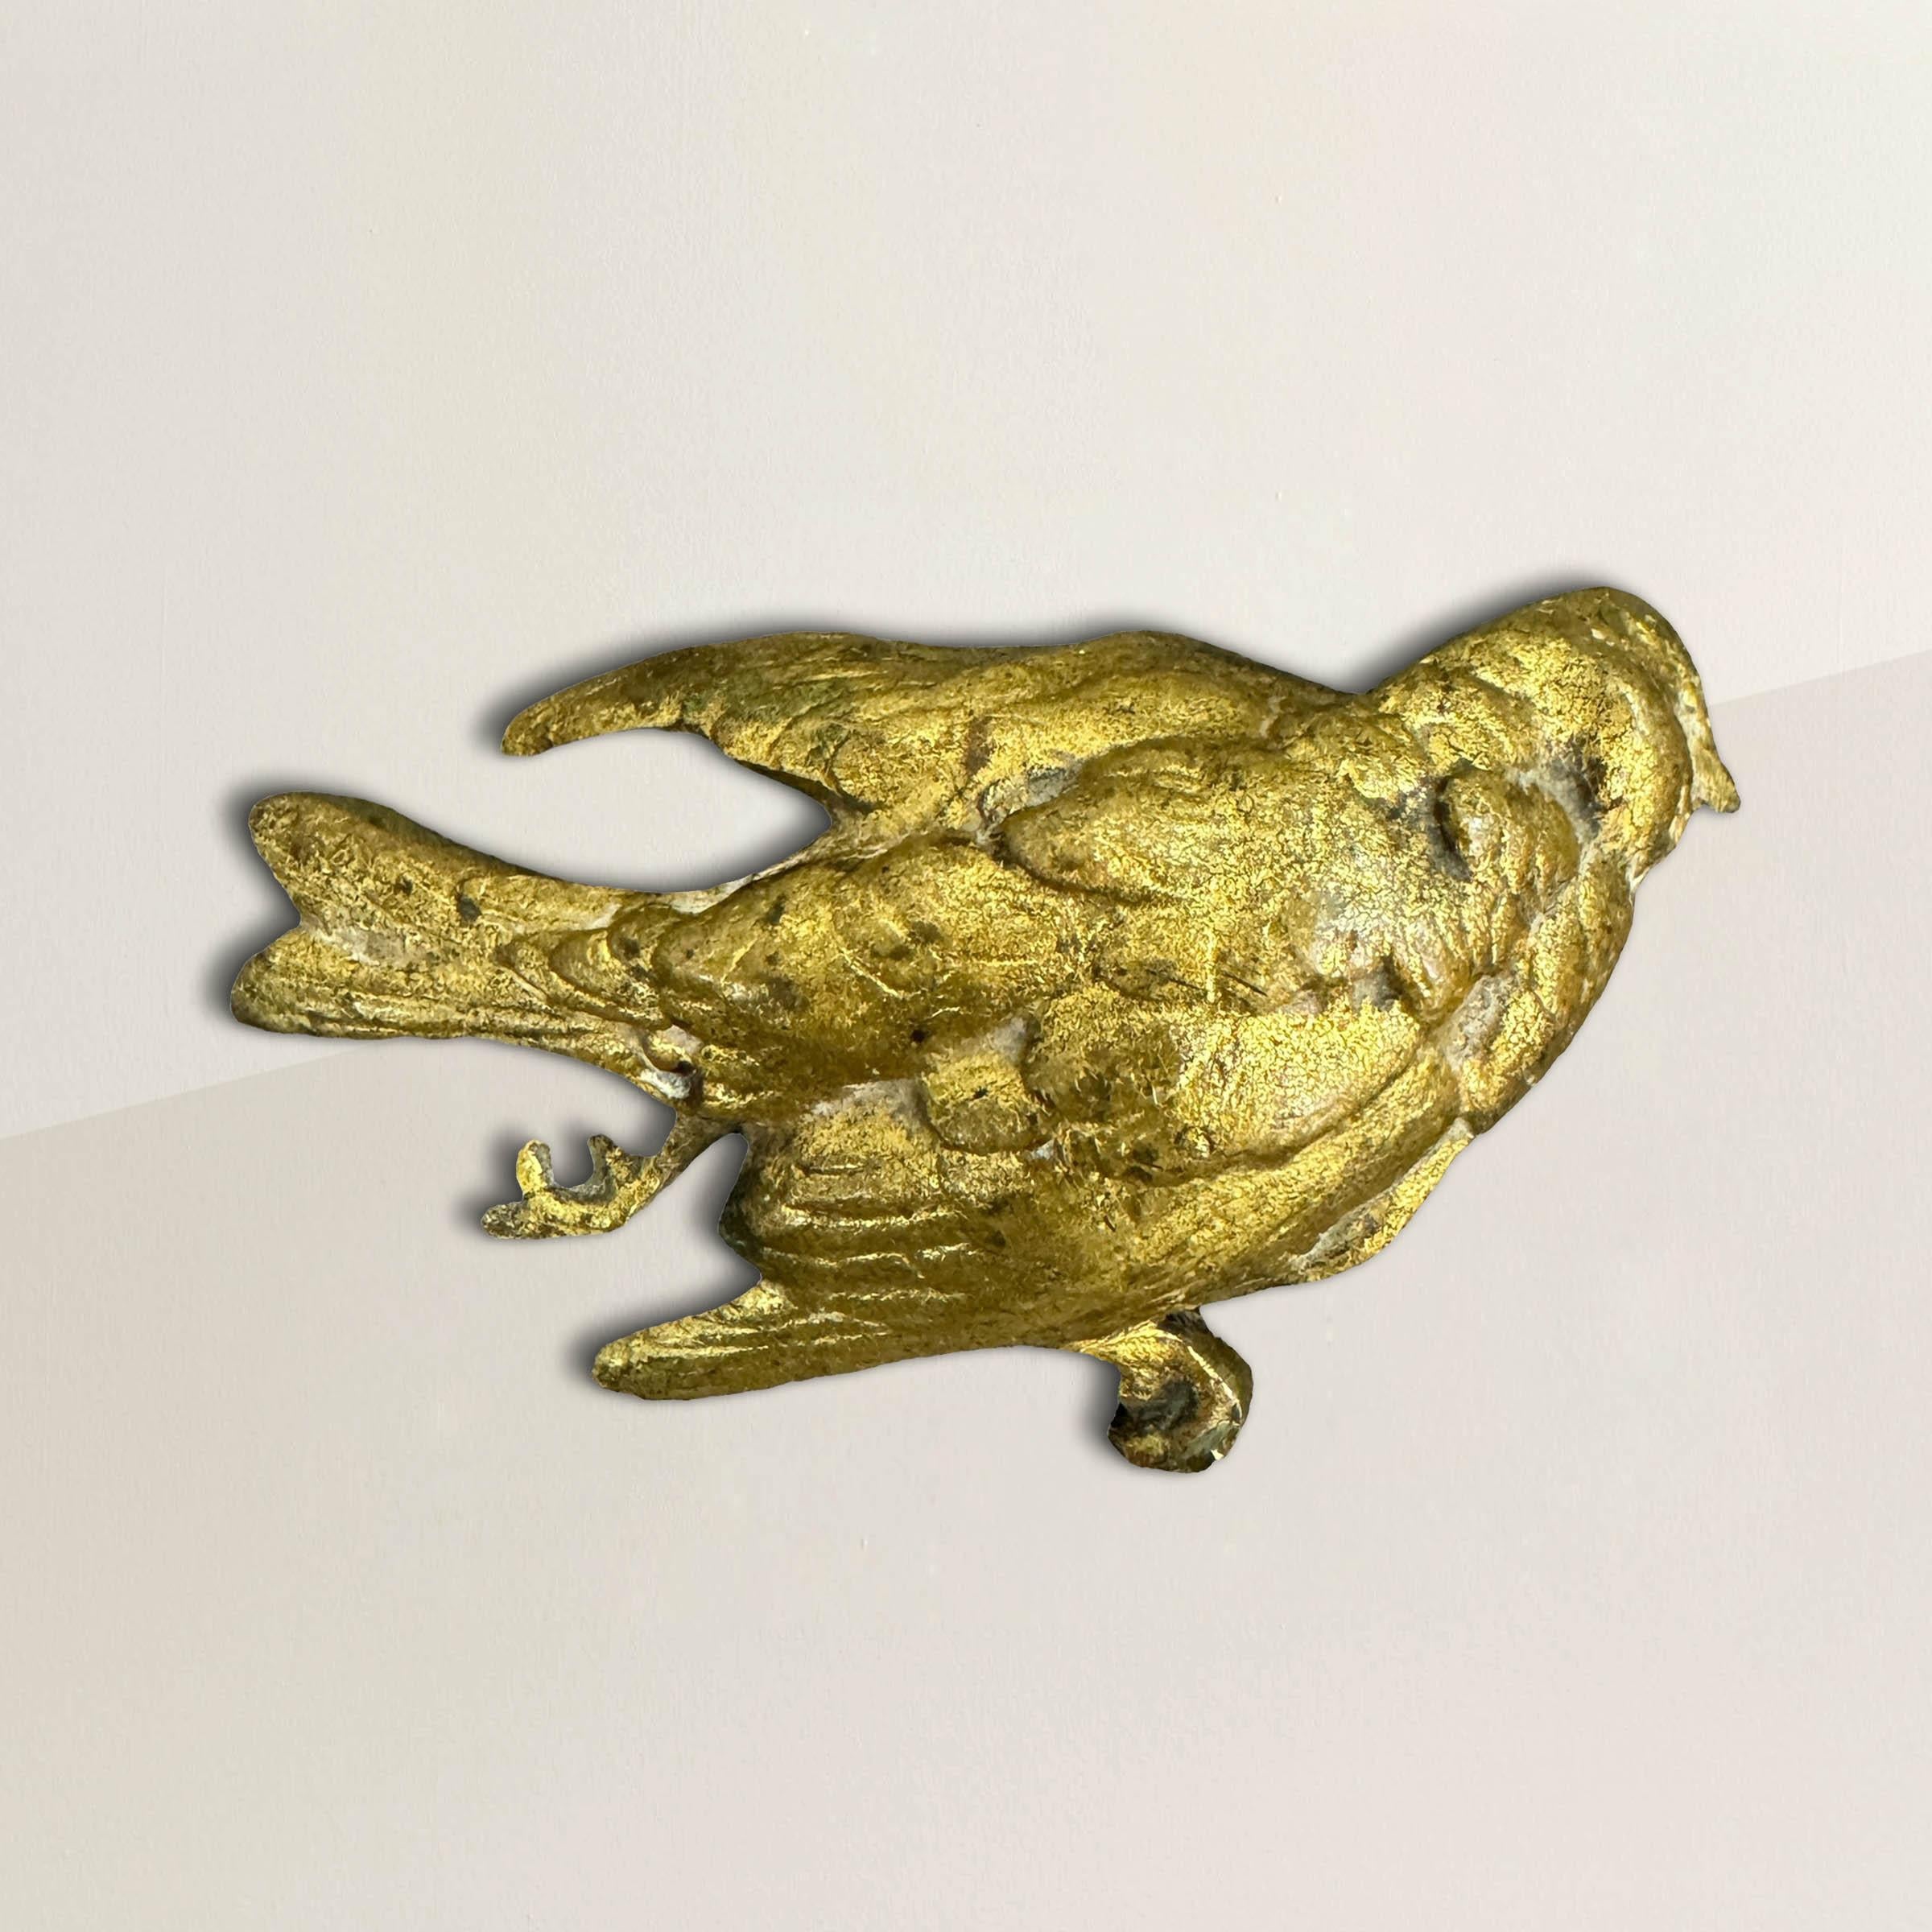 This 19th-century English life-size gilt bronze sculpture delicately captures the poignant beauty of a dead finch, meticulously crafted with intricate detail. In Victorian England, dead birds symbolized mortality, urging contemplation of life's